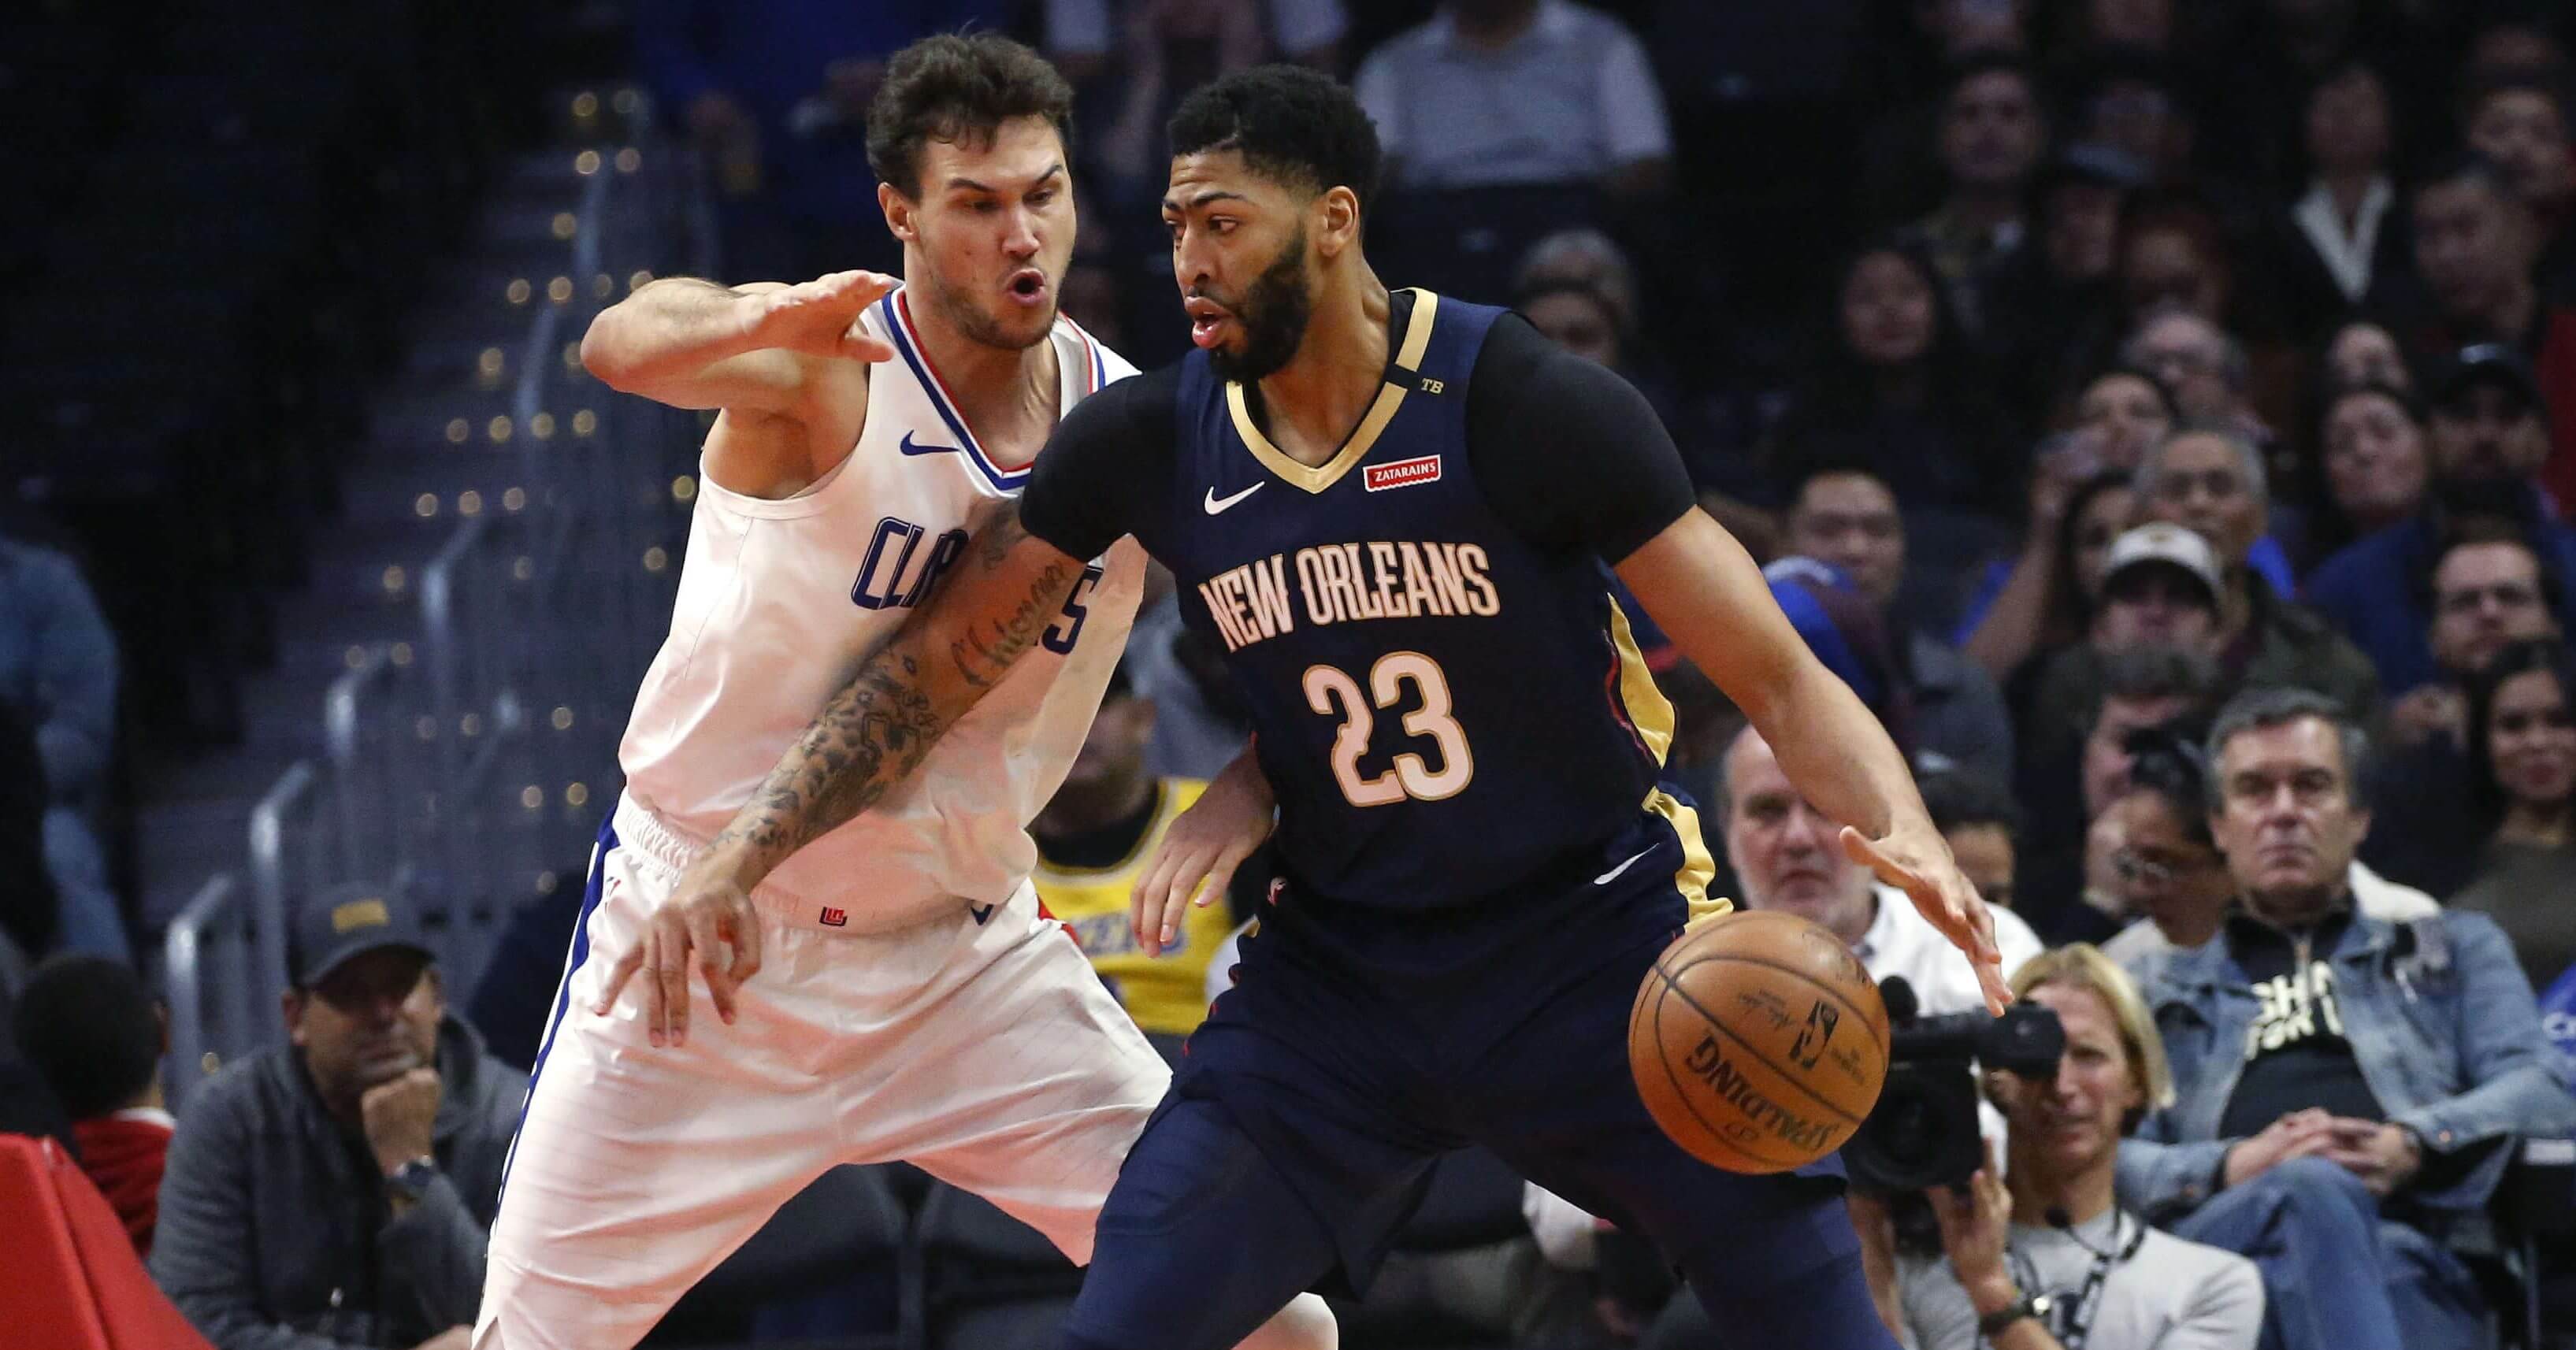 New Orleans Pelicans star Anthony Davis, right, dribbles against the Los Angeles Clippers' Danilo Gallinari during a Jan. 14 game in Los Angeles.